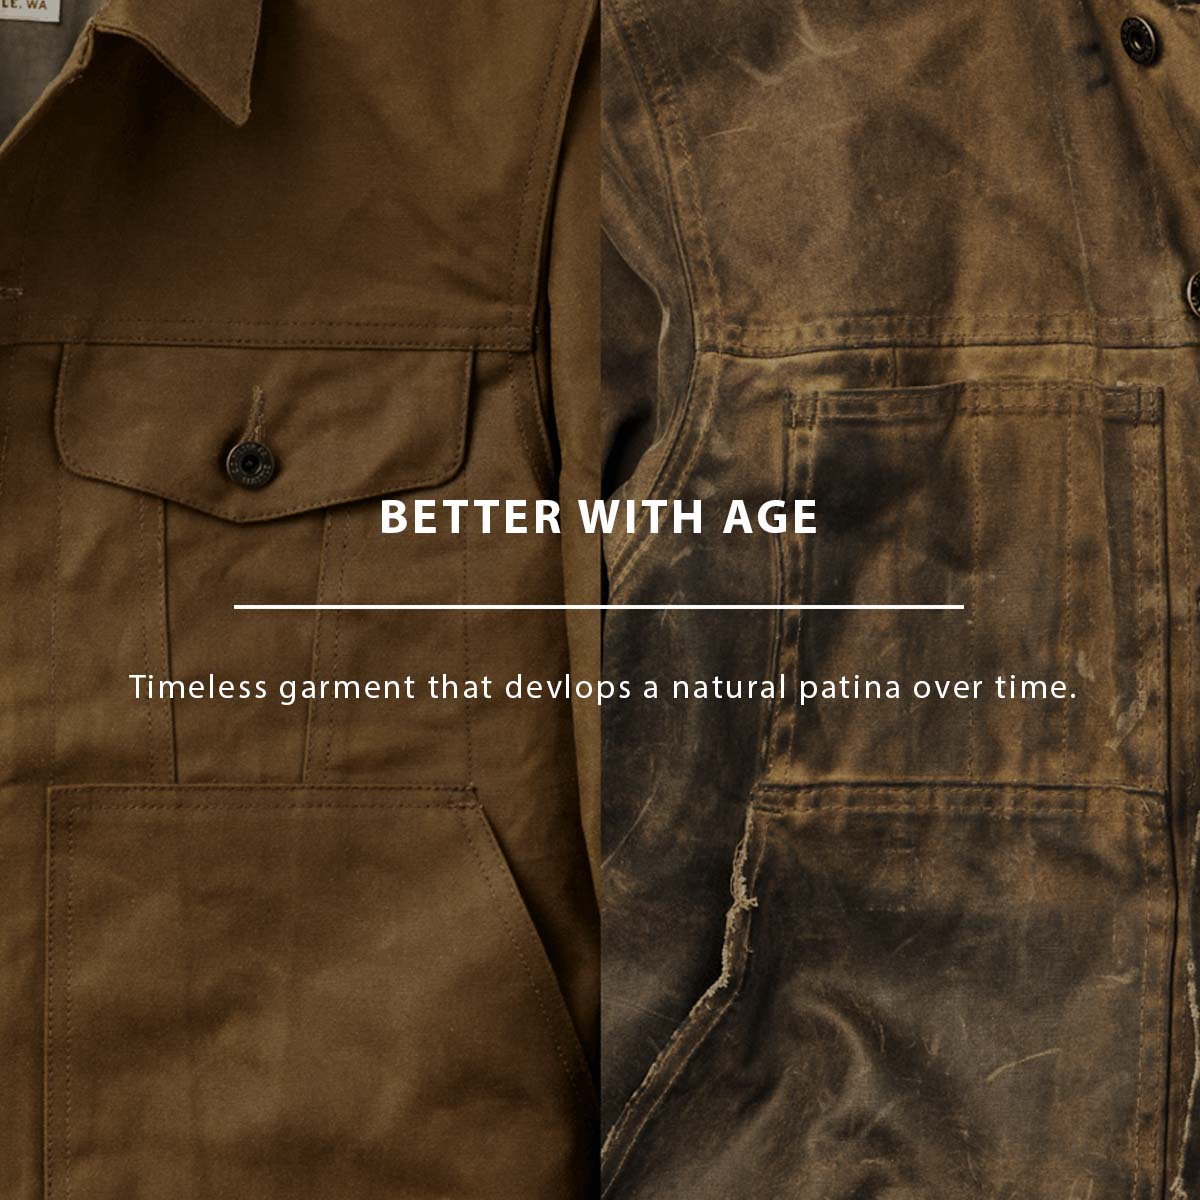 Filson Tin Cloth Field Jacket, better with age.